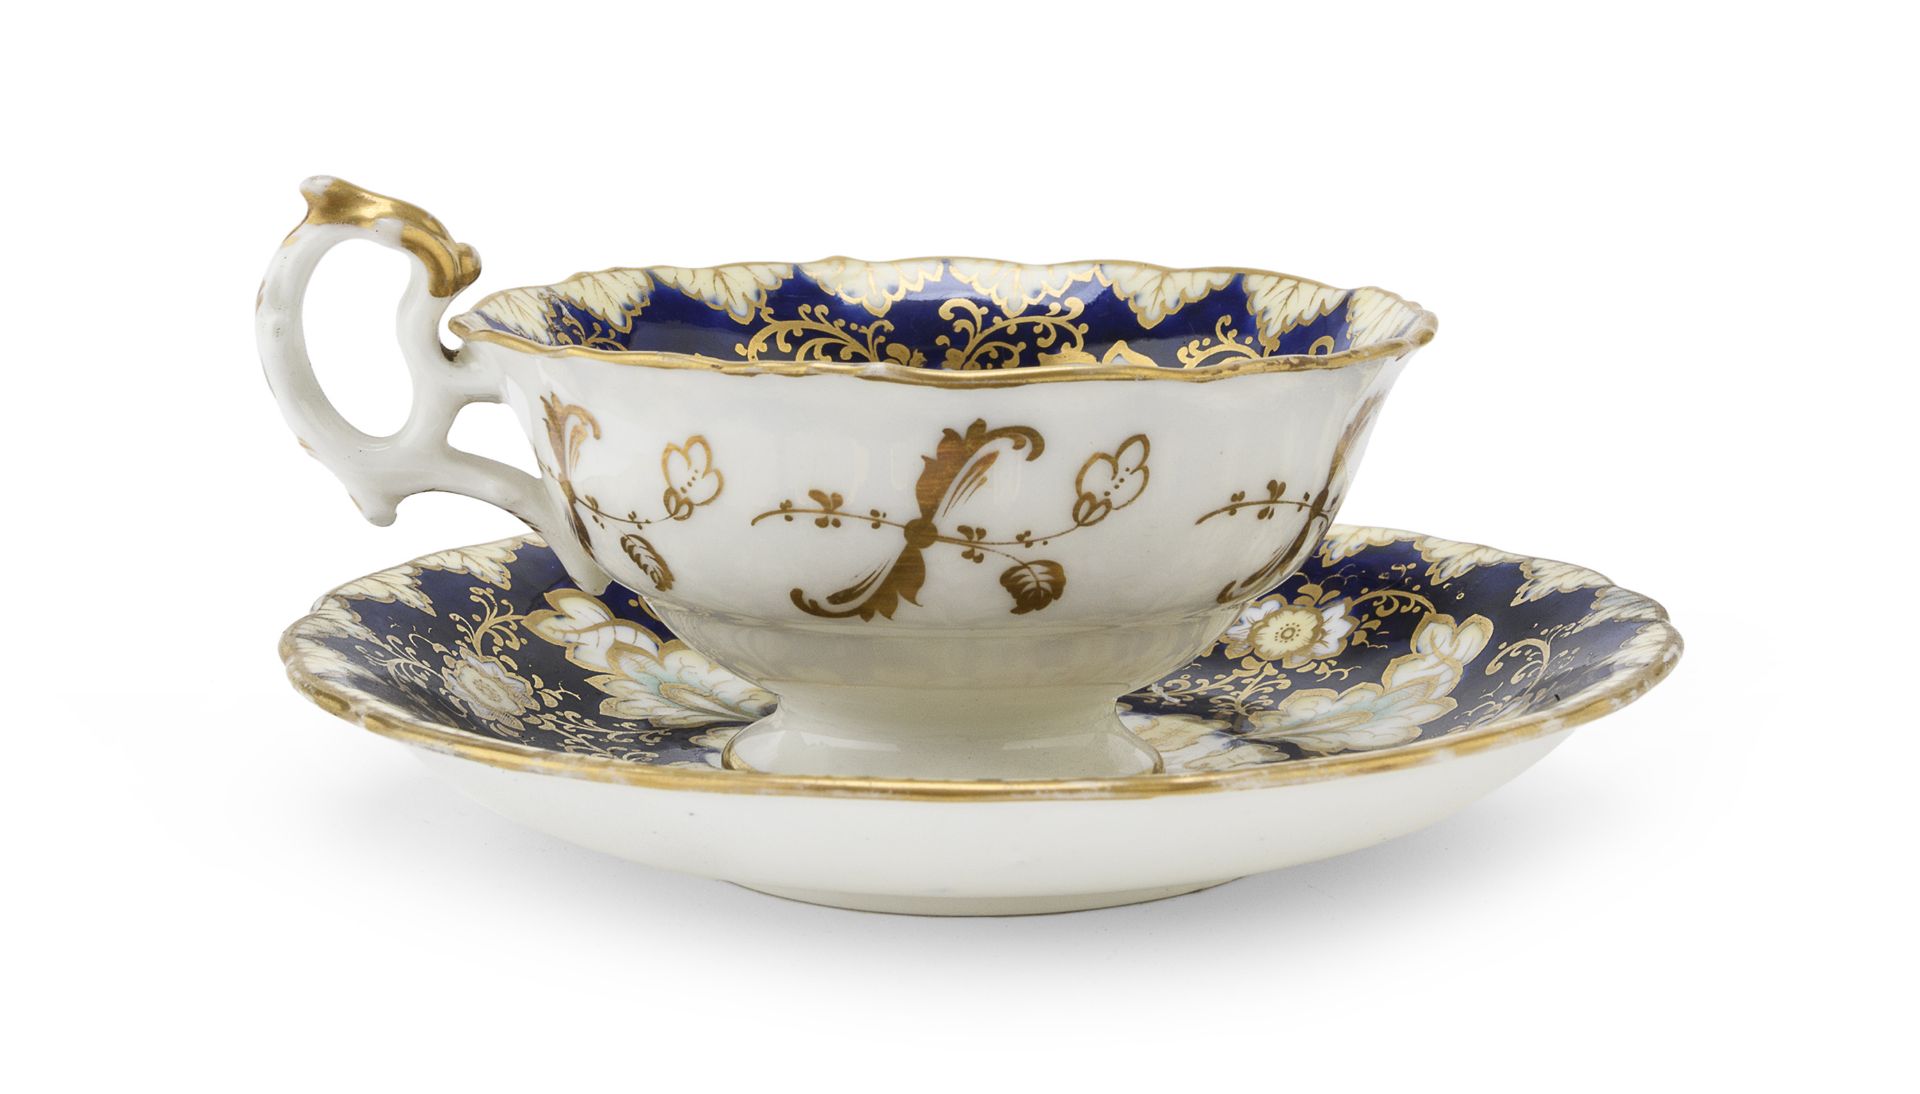 EARTHENWARE CUP AND SAUCER ENGLAND END OF THE 19TH CENTURY - Image 2 of 2